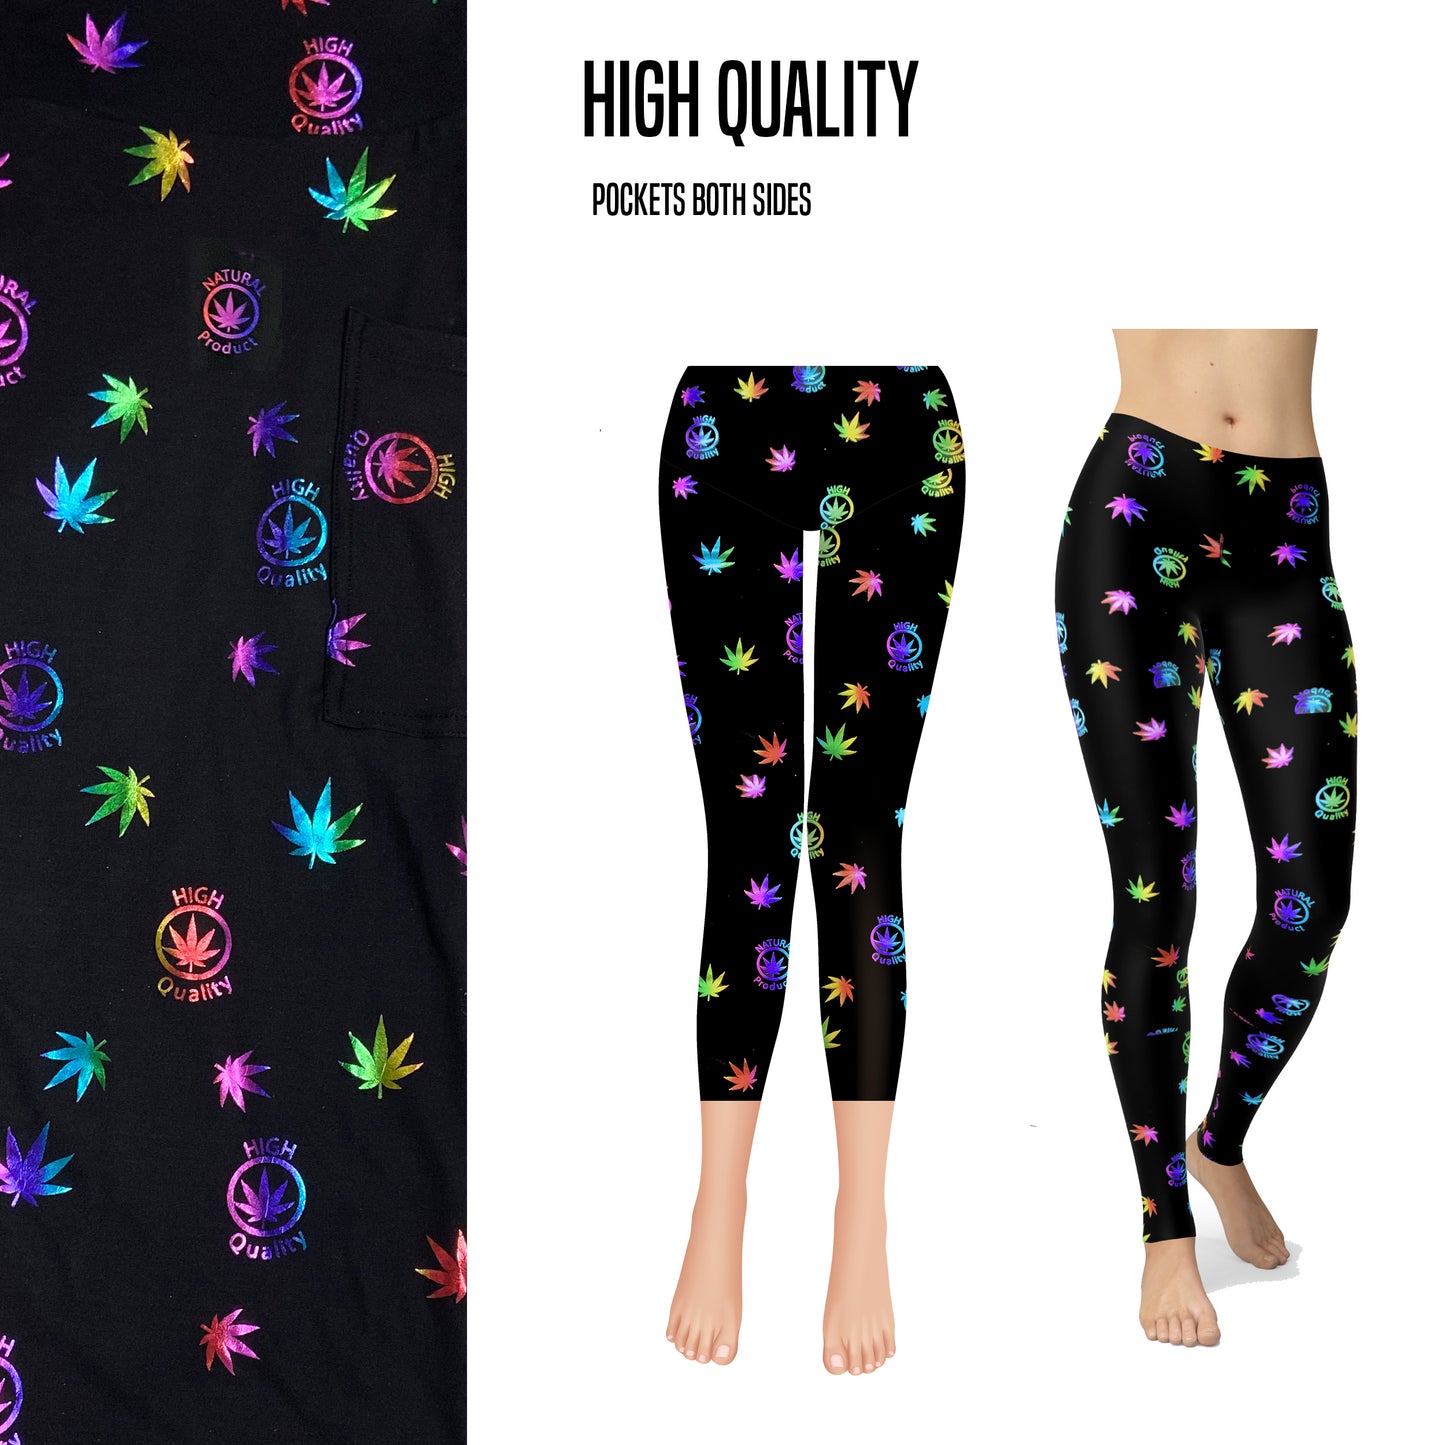 High Quality Glitter leggings and capris with pockets